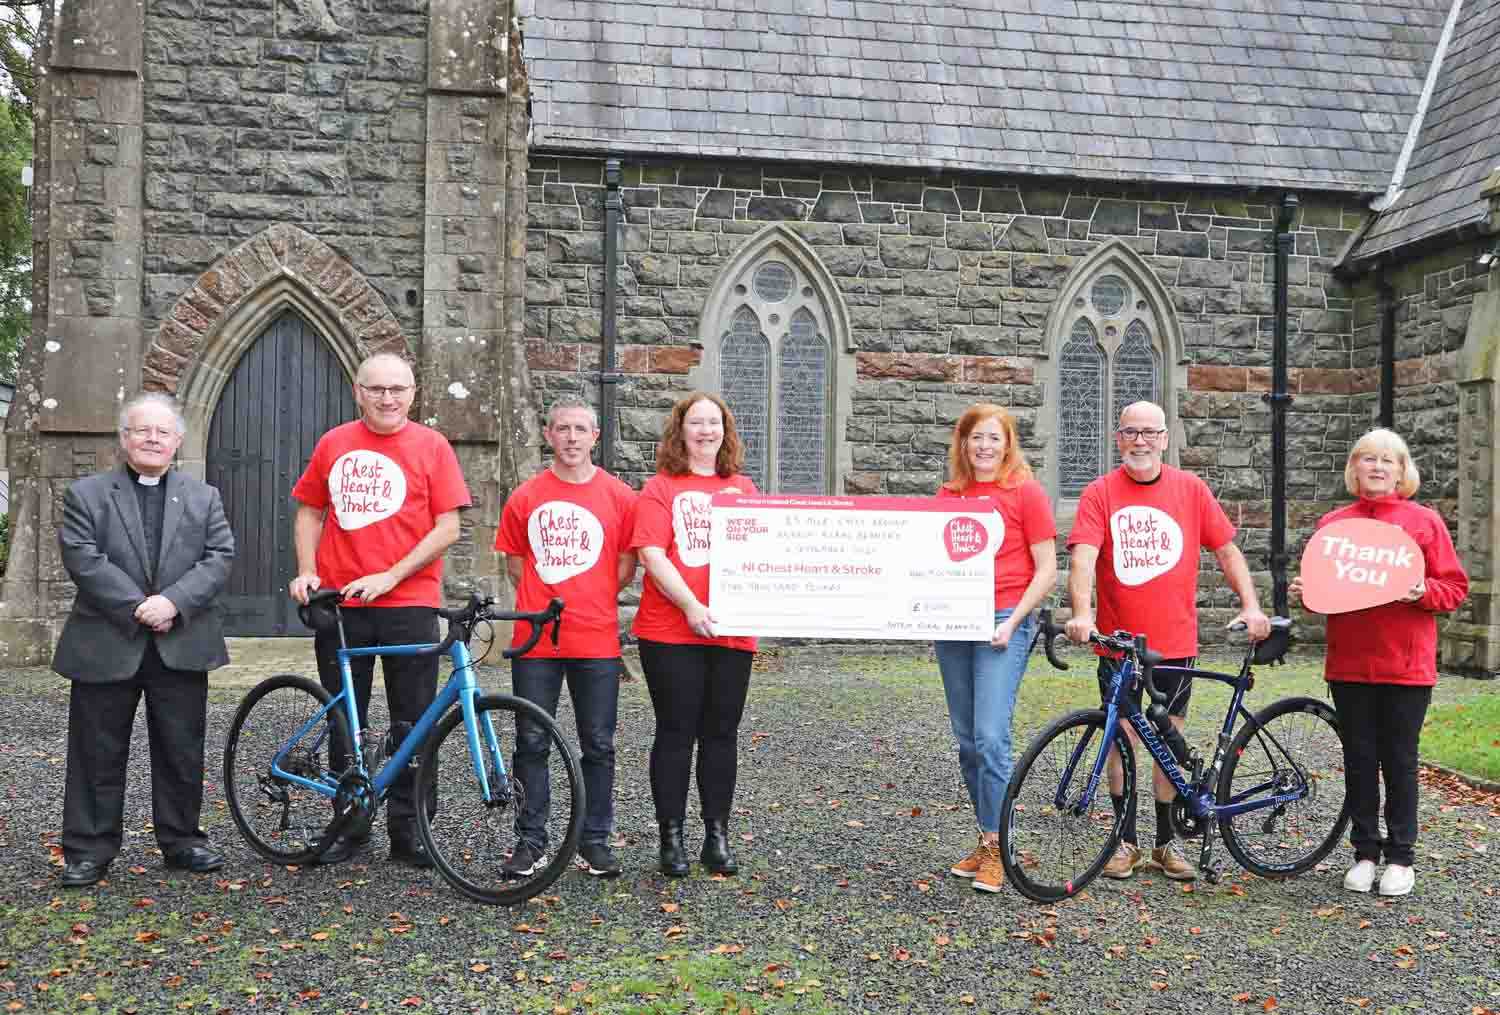 Antrim Rural Deanery cycle raises £5,000 - Church of Ireland - A Member of  the Anglican Communion